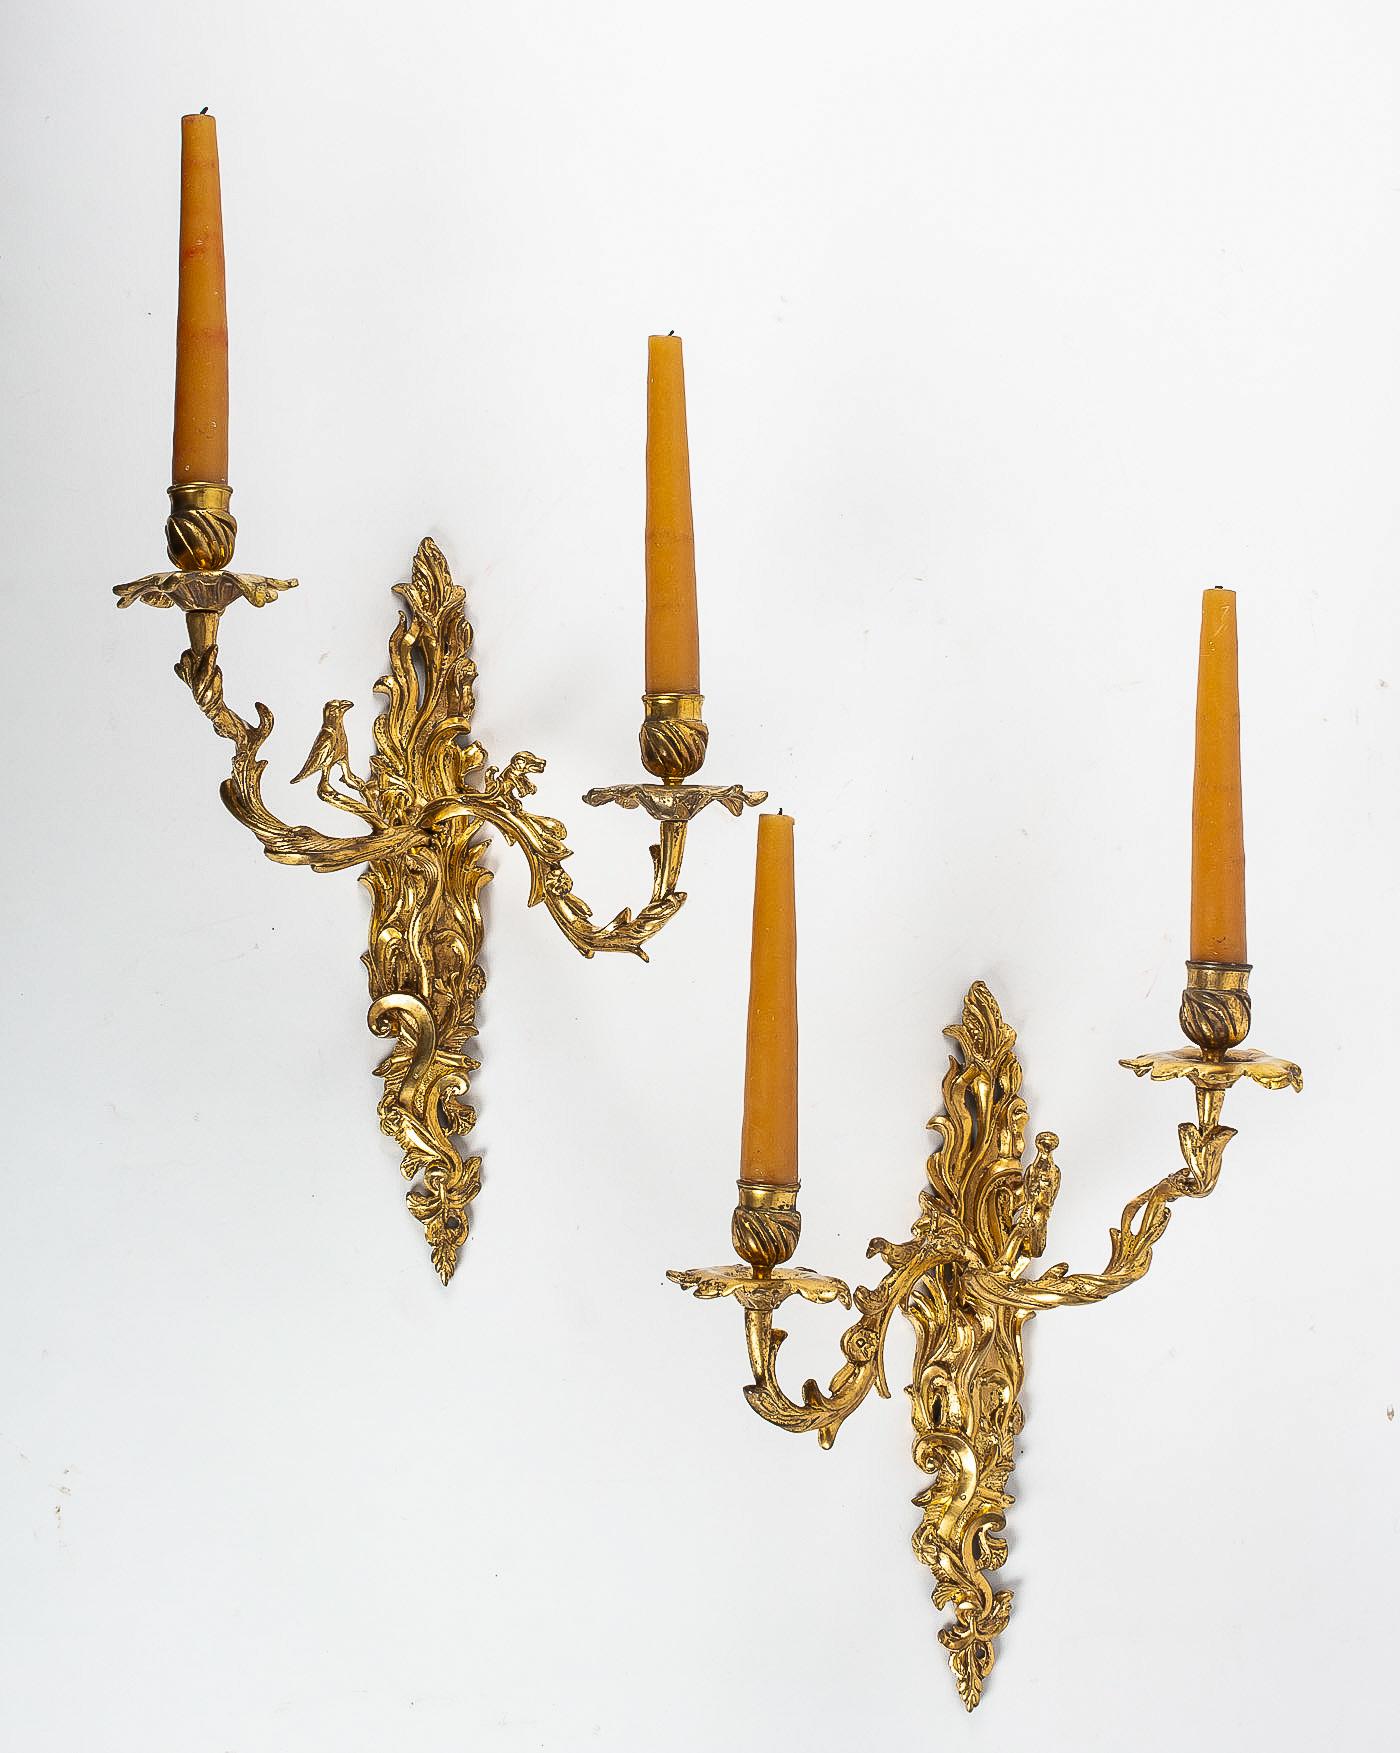 The crowned C Mark, rare pair of Hunting design Ormolu Louis XV period sconces, circa 1745-1749.

A rare and elegant pair of hunting design chiseled gilt-bronze sconces, one decorated with foliage, dog and bird, and the other decorated with leaf,